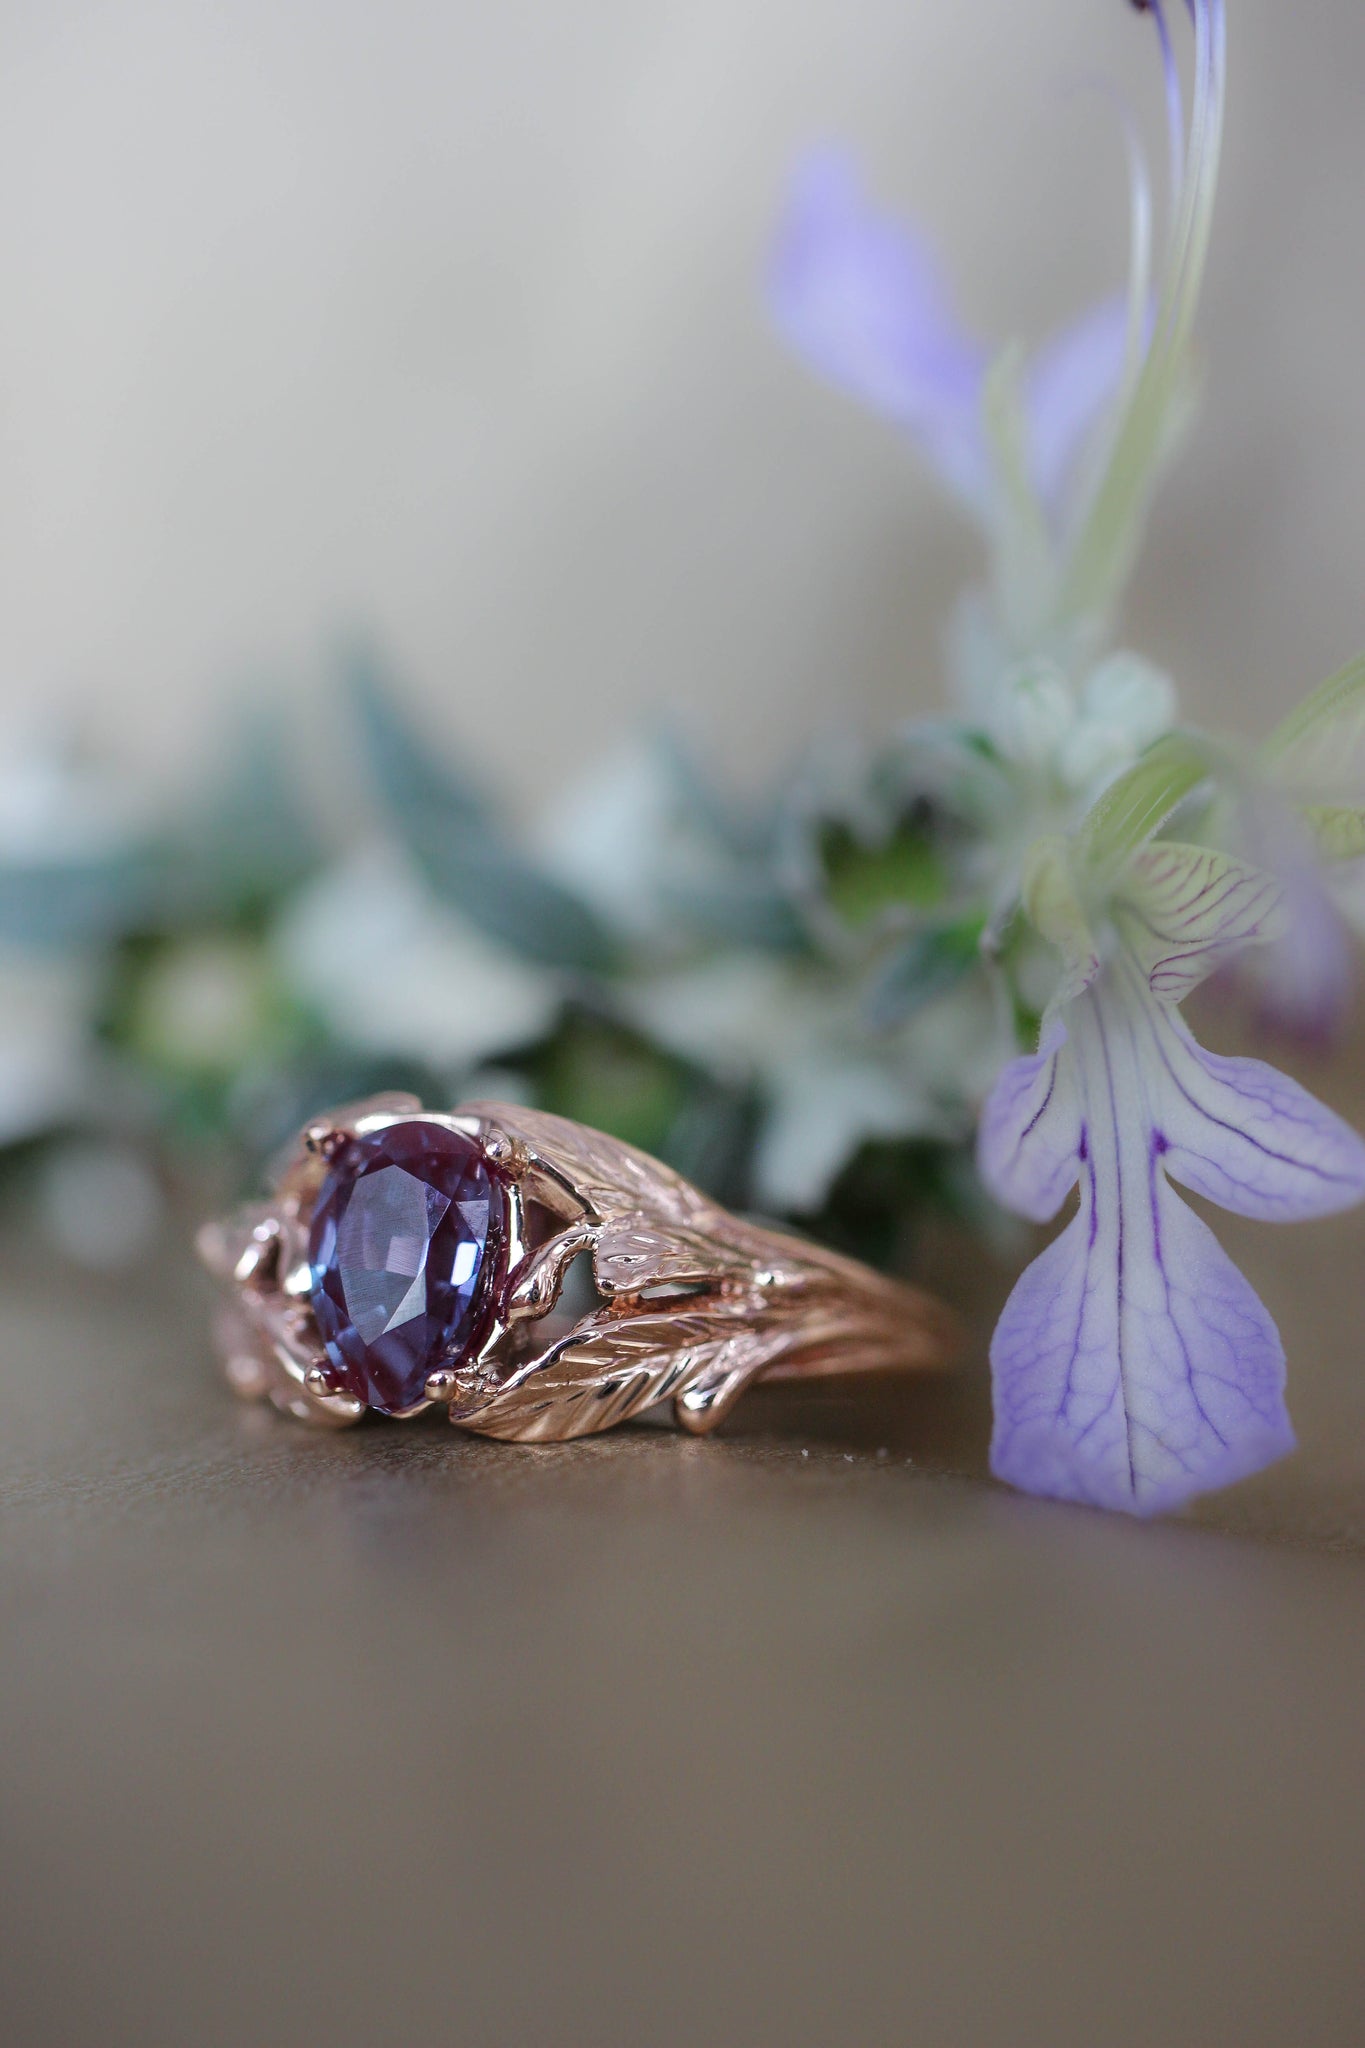 READY TO SHIP: Wisteria in 18K rose gold, pear alexandrite 7x5 mm, RING SIZE - 8 US - Eden Garden Jewelry™